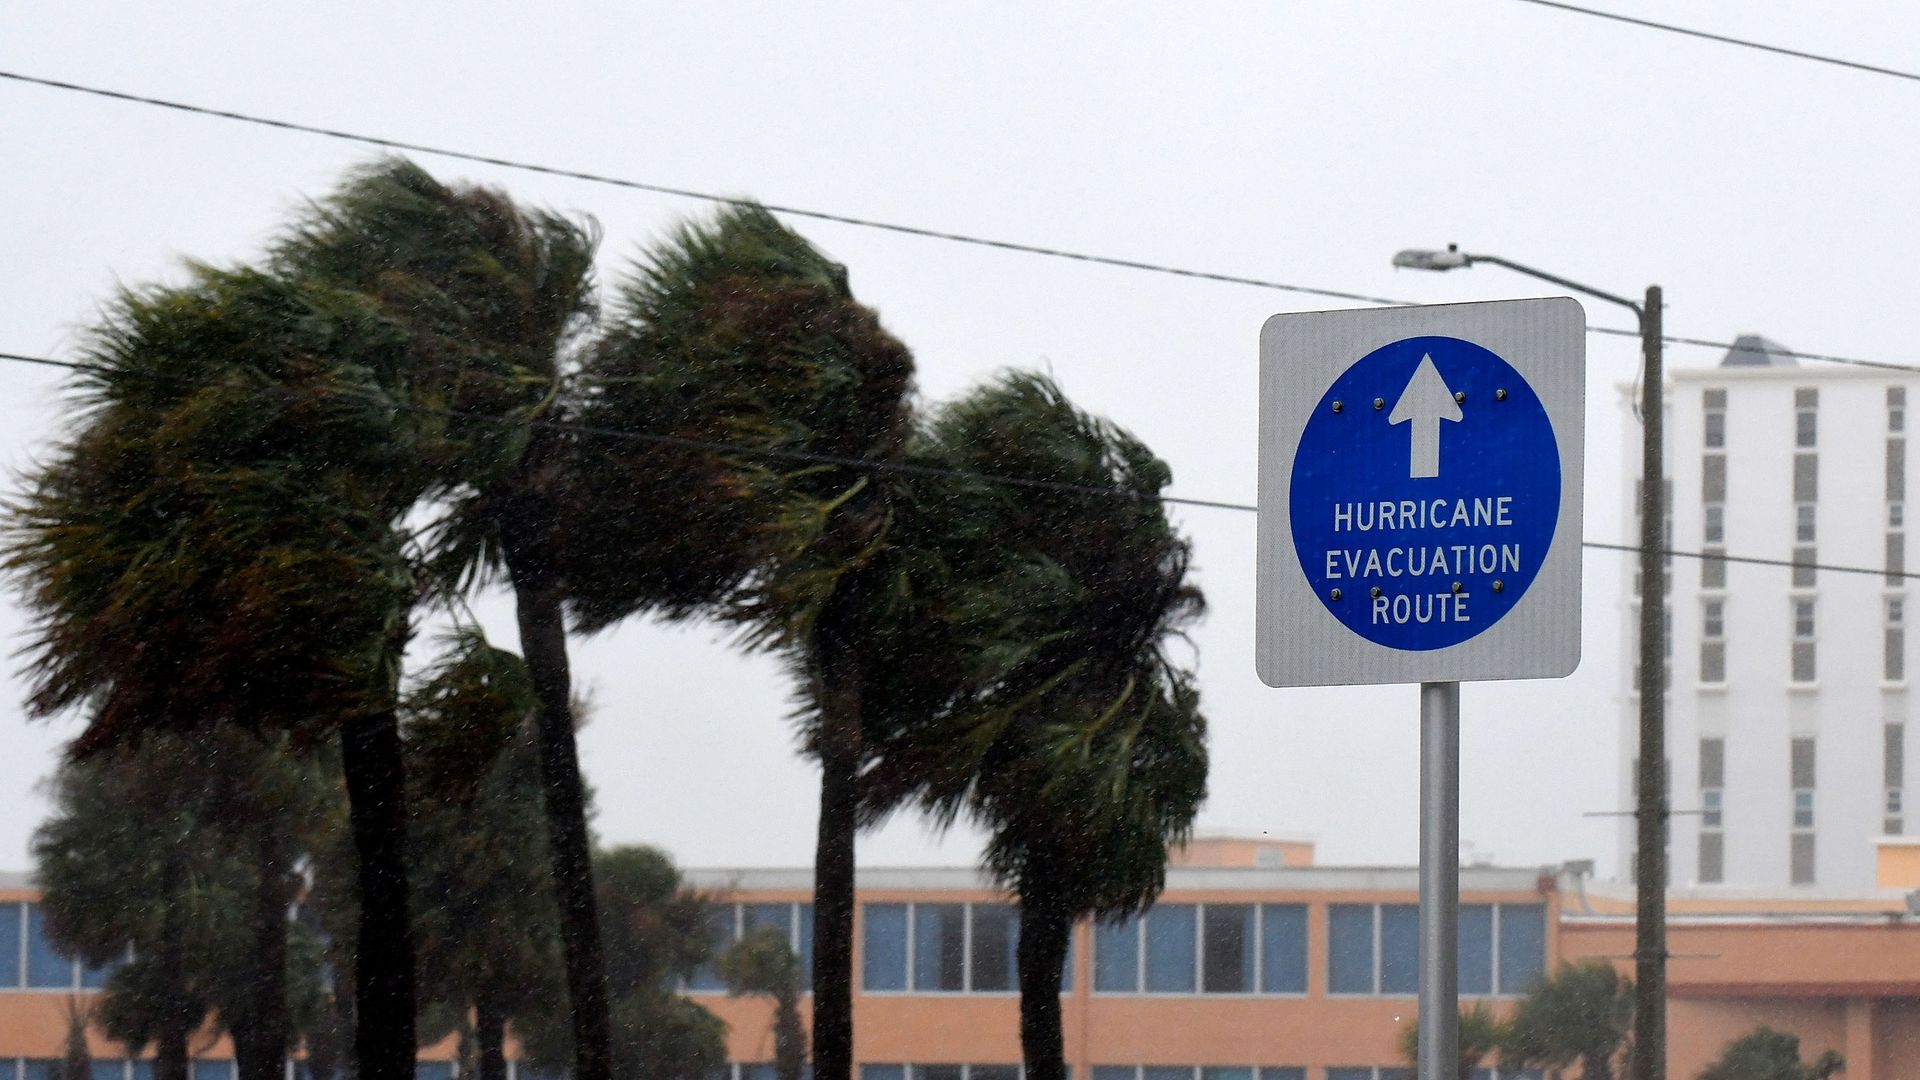 Photo of a sign that says "Hurricane evacuation route" standing against the wind blowing trees away